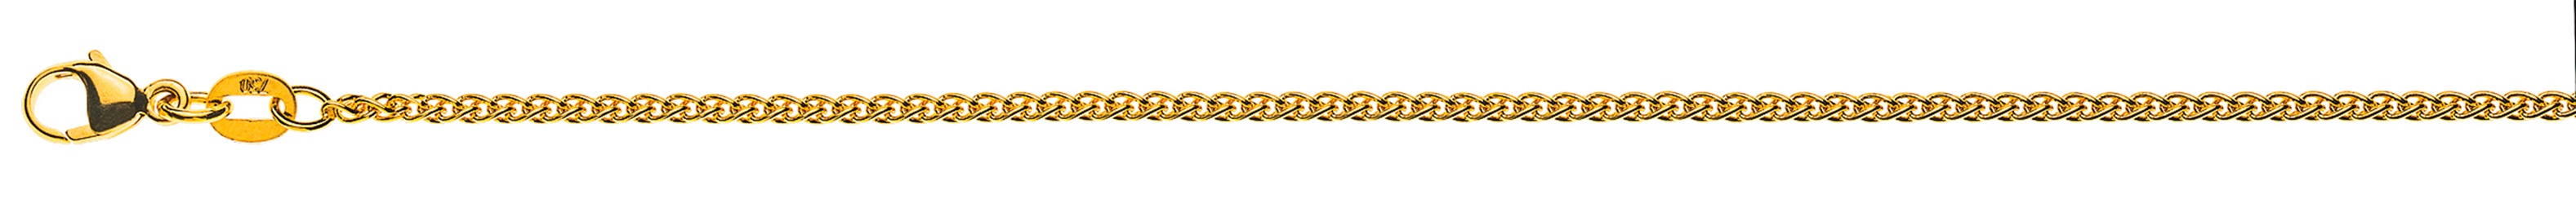 AURONOS Style Necklace yellow gold 9K cable chain 45cm 1.65mm